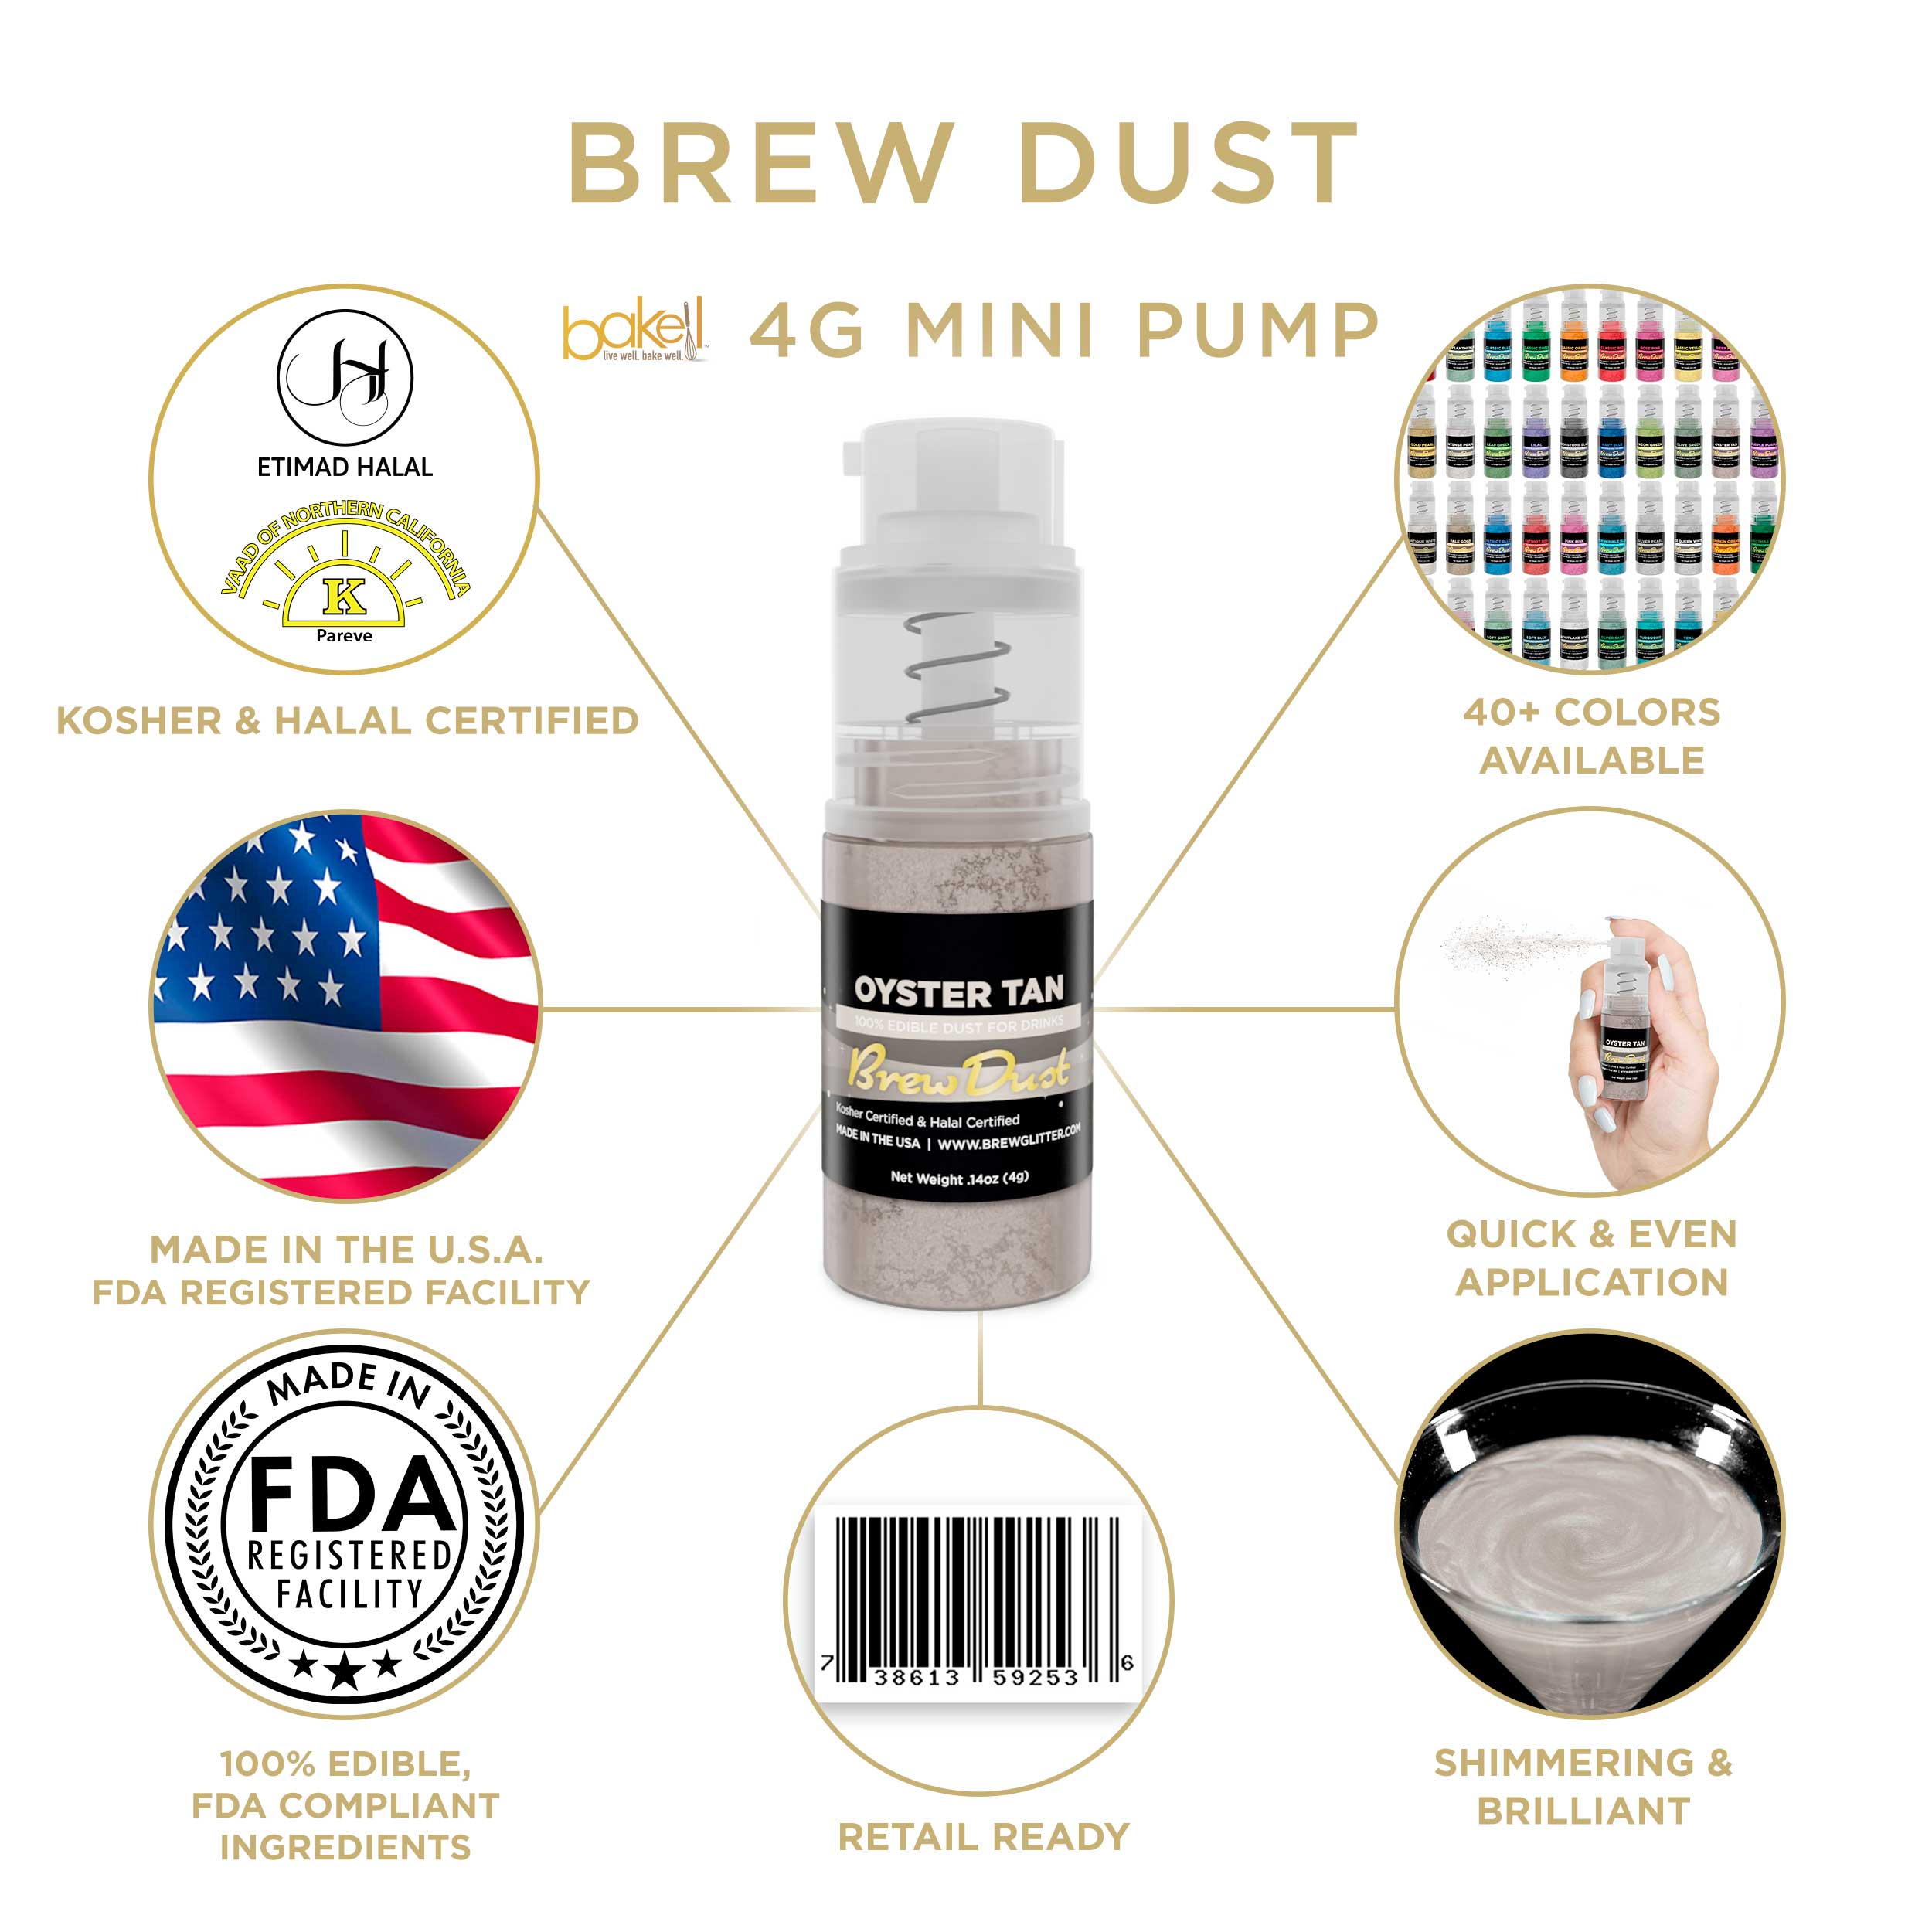 Oyster Tan Brew Dust Miniature Spray Pump | Infographic and Information